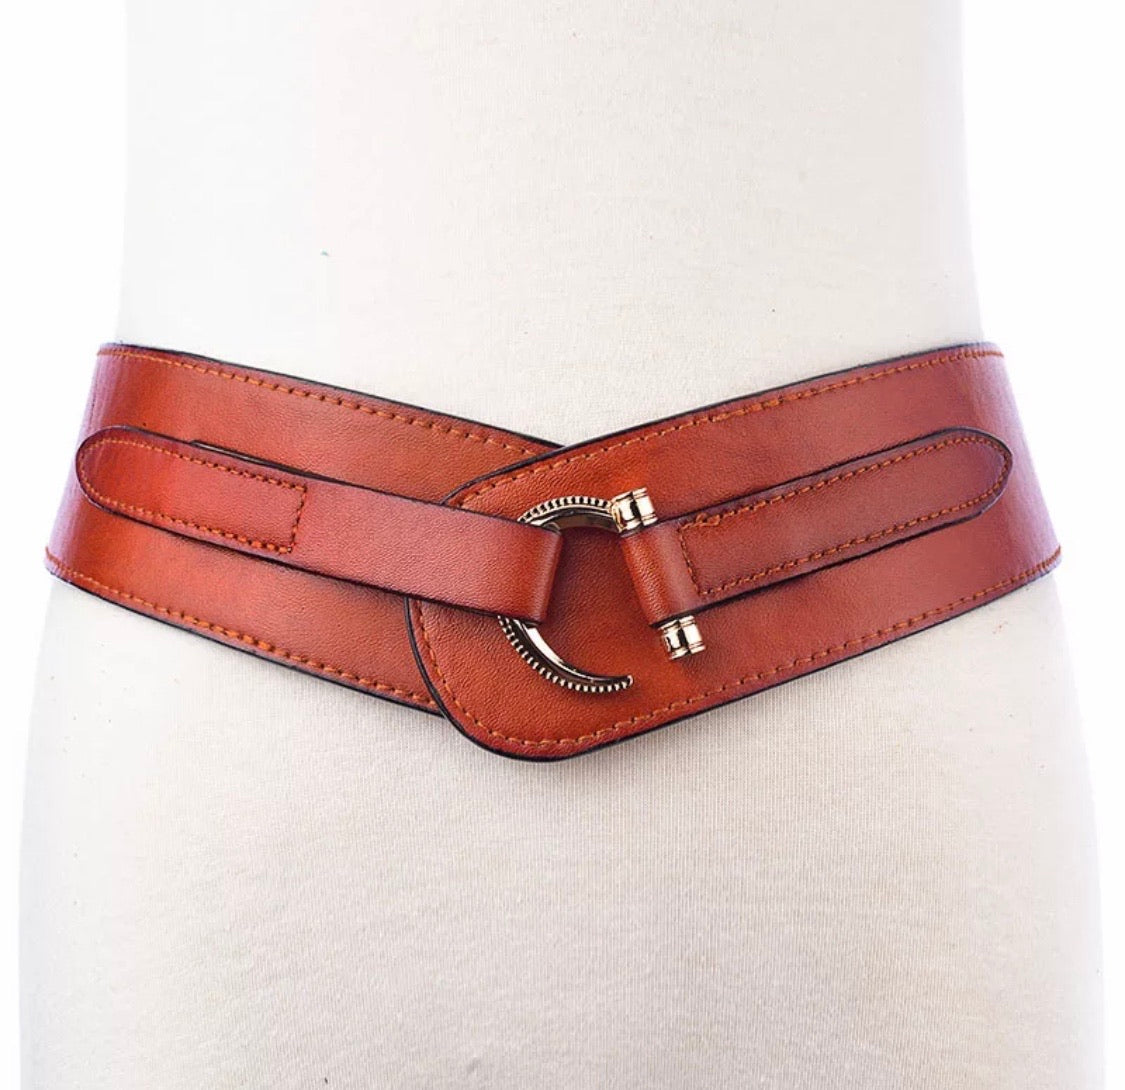 Quality Wide Retro Leather Belts 3 Colors Fits Waist 29-35 Inches Belt ...